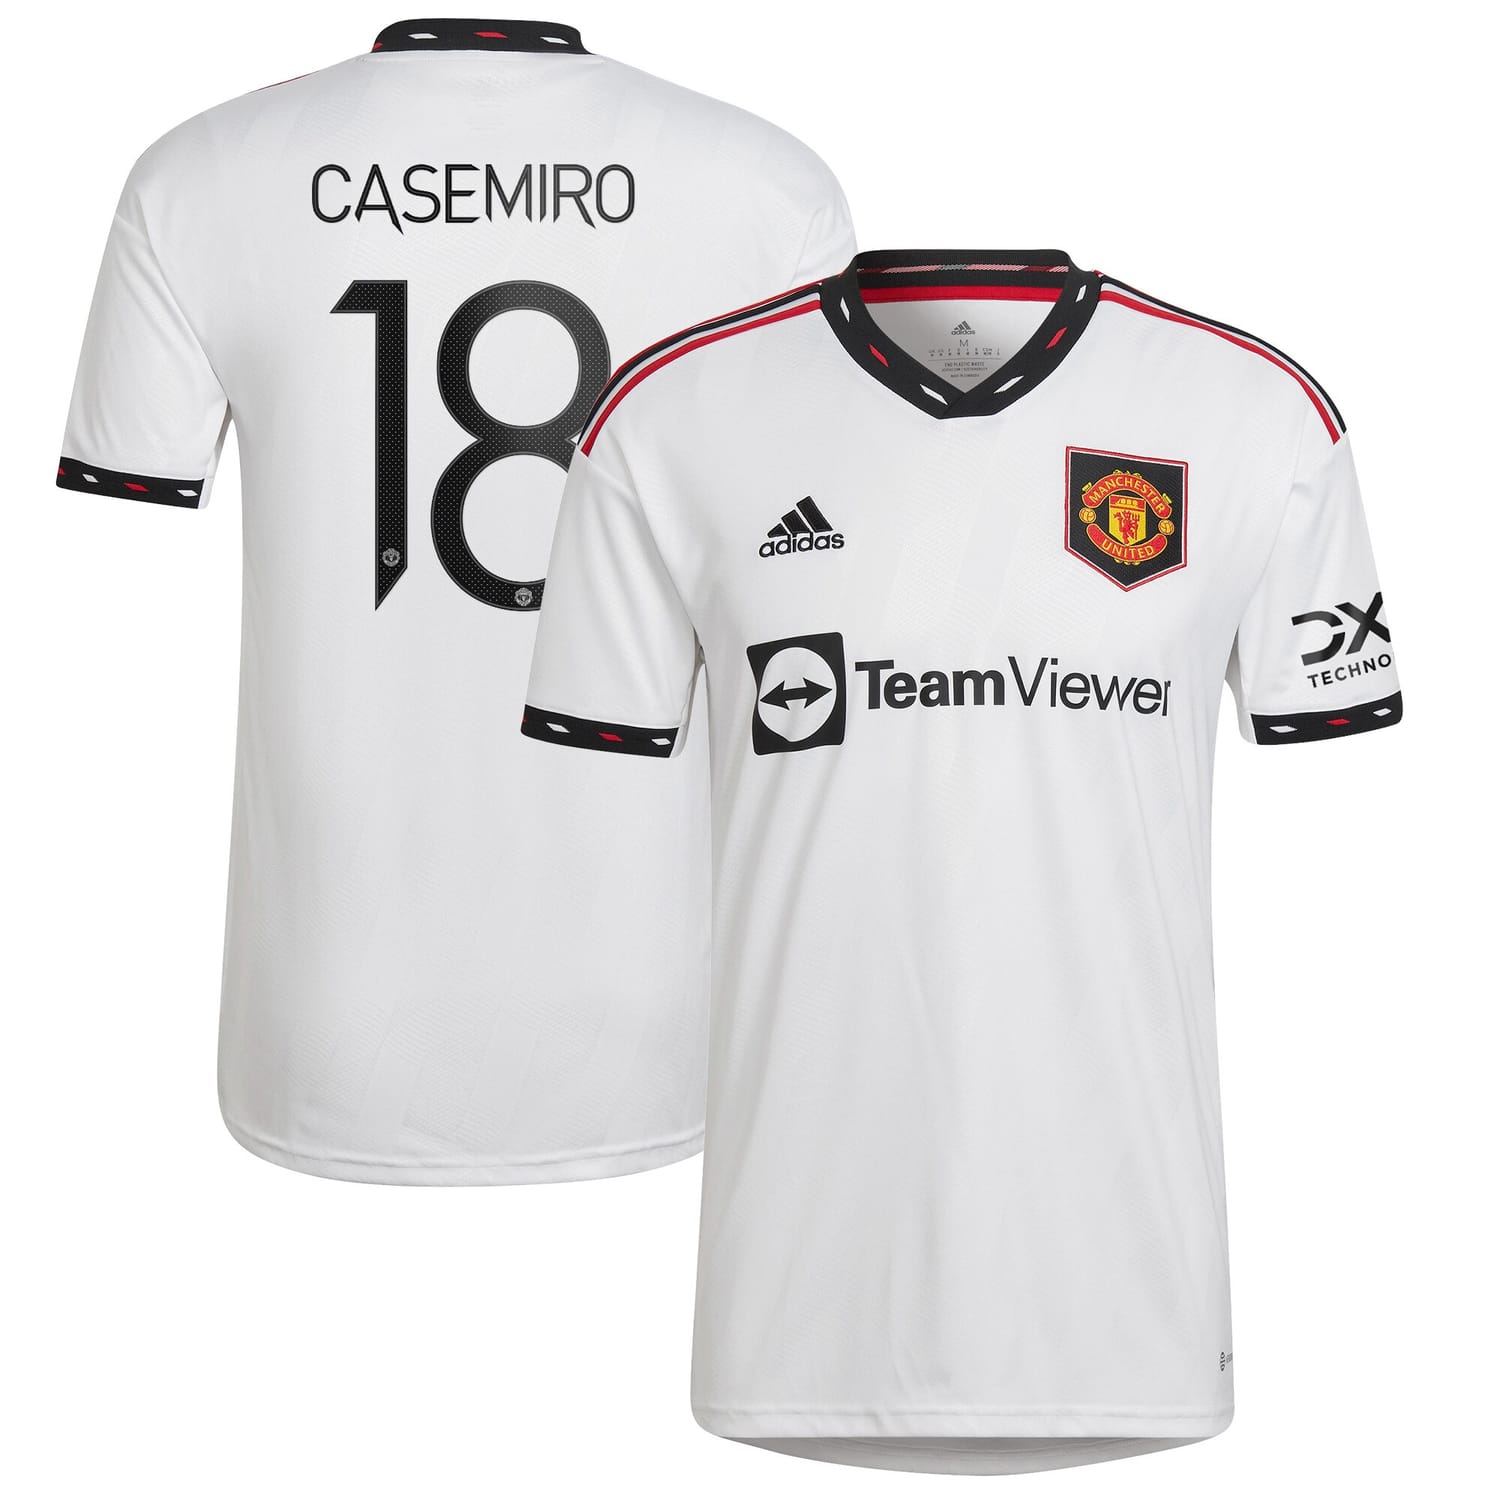 Premier League Manchester United Away Cup Jersey Shirt 2022-23 player Casemiro 18 printing for Men